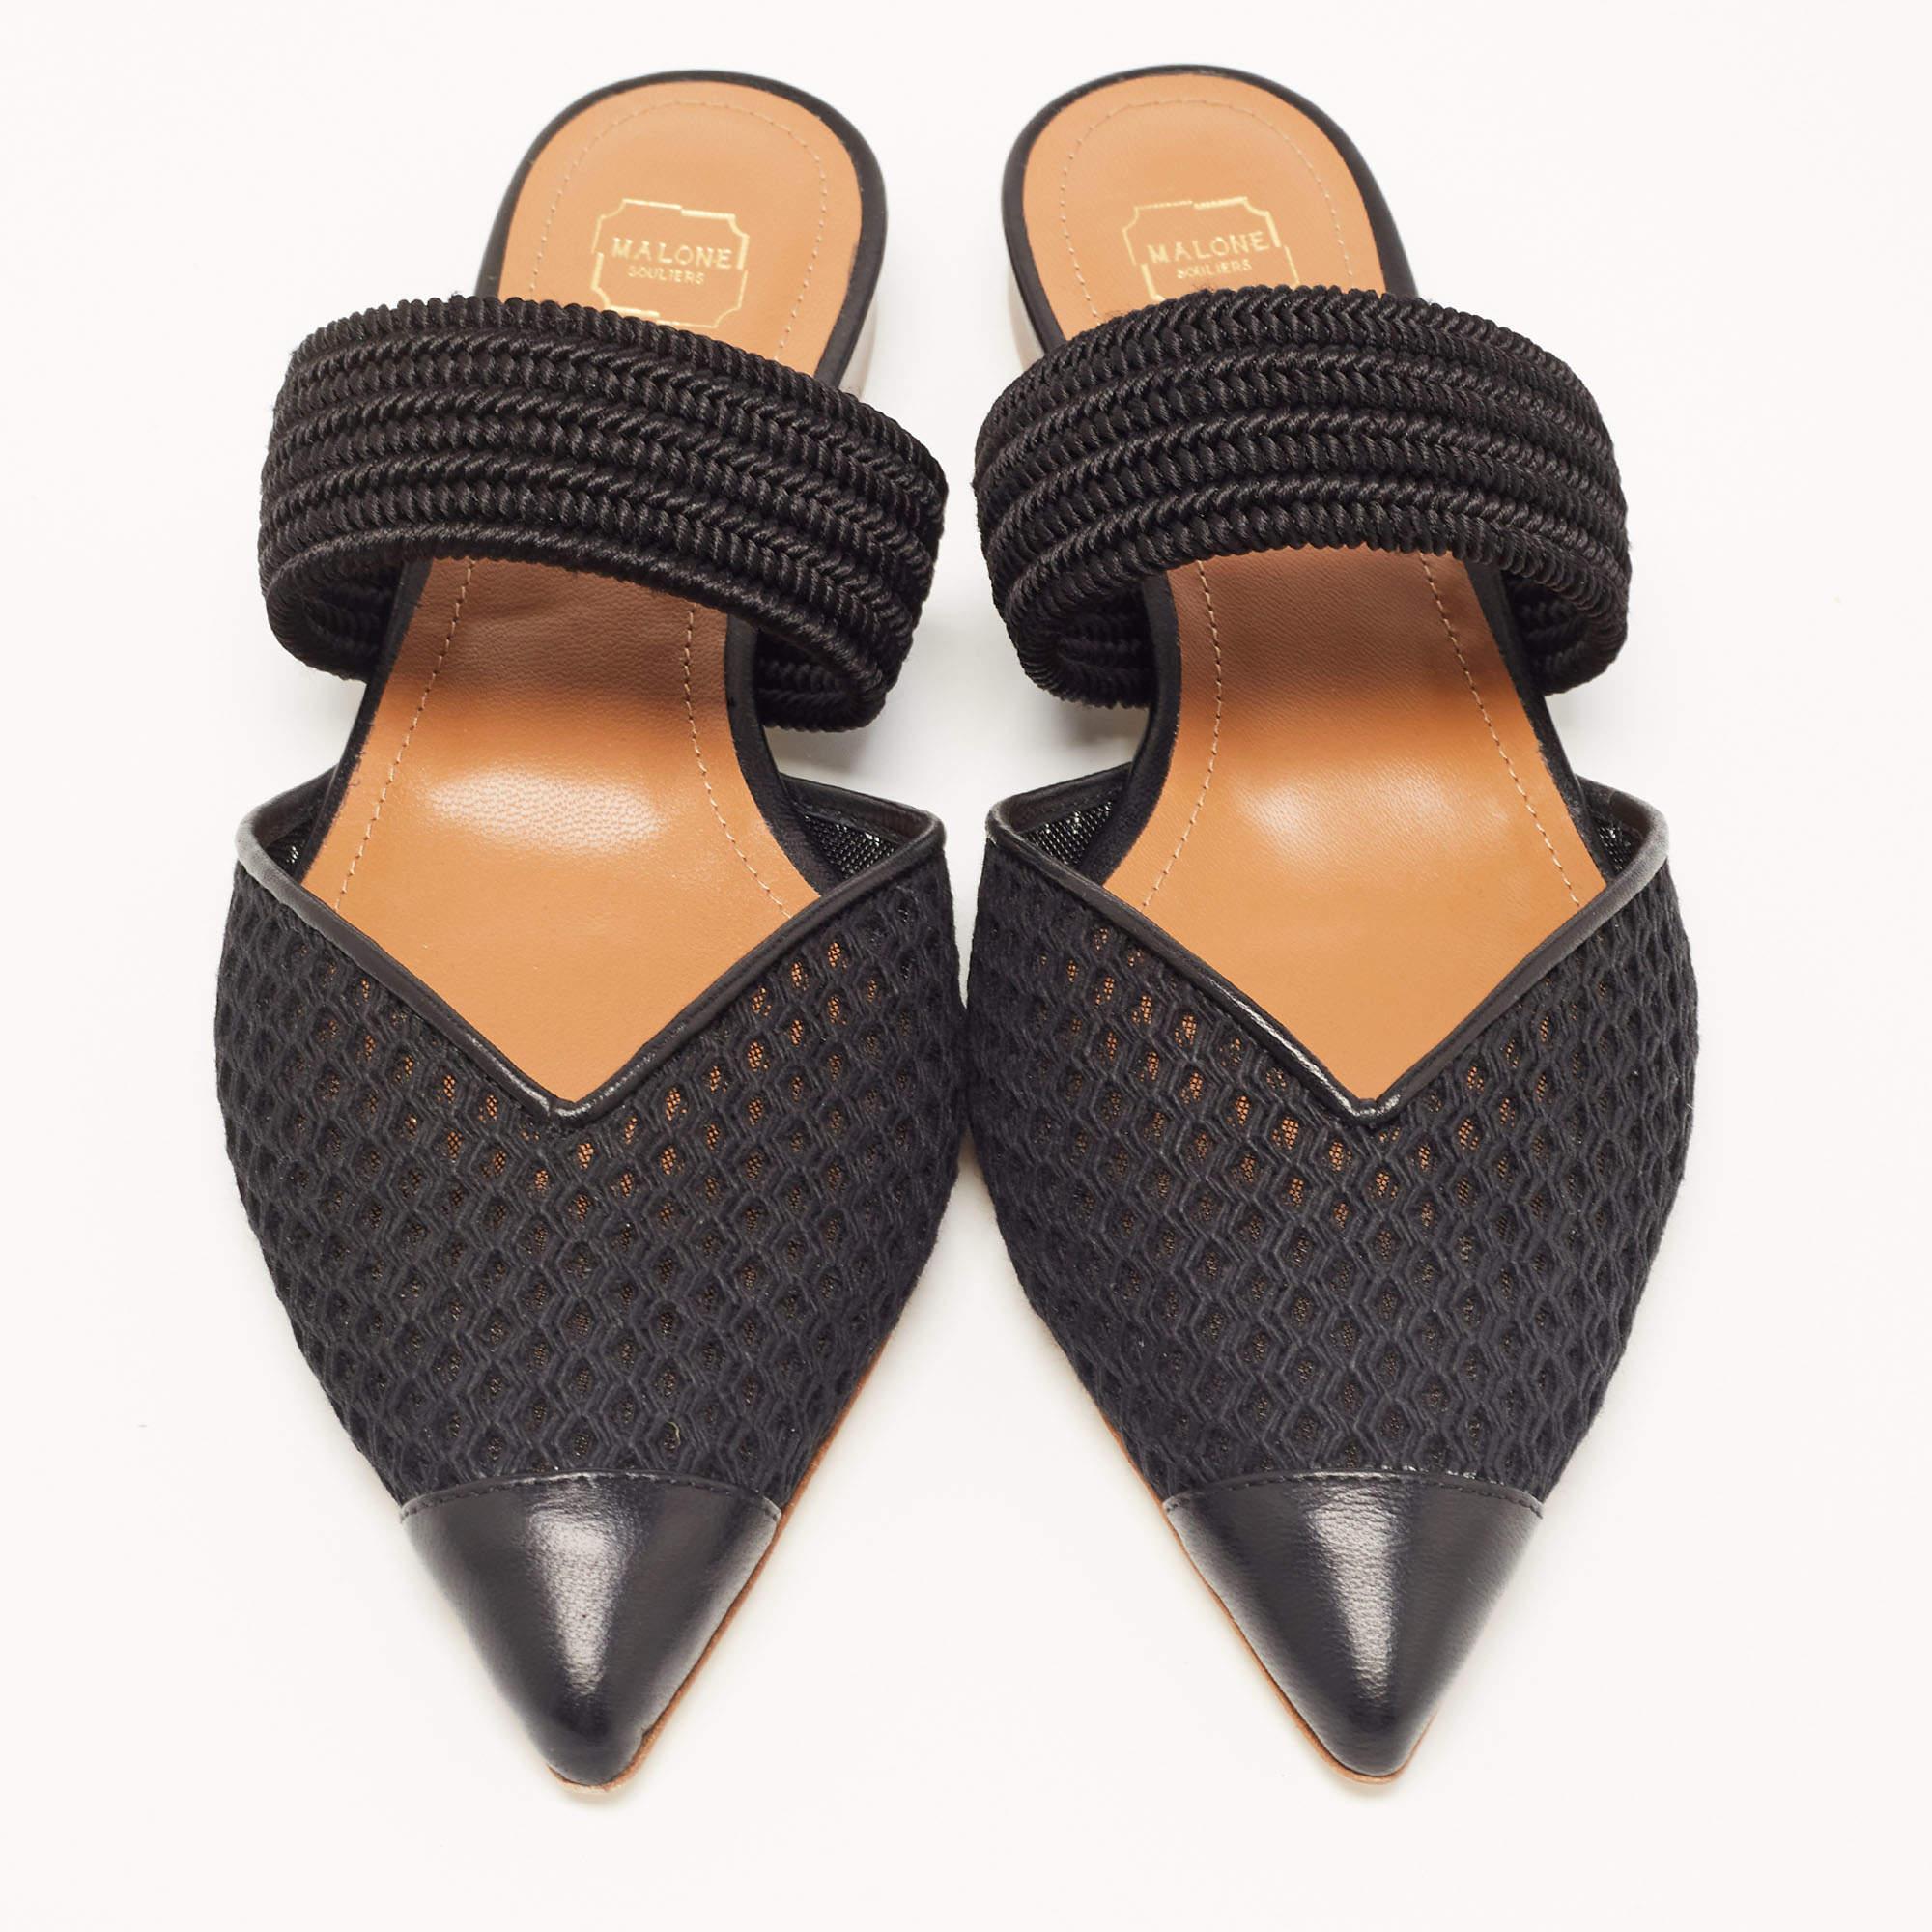 A perfect blend of luxury, style, and comfort, these designer mules are made using quality materials and frame your feet in the most elegant way. They can be paired with a host of outfits from your wardrobe.

Includes
Original Dustbag, Original Box